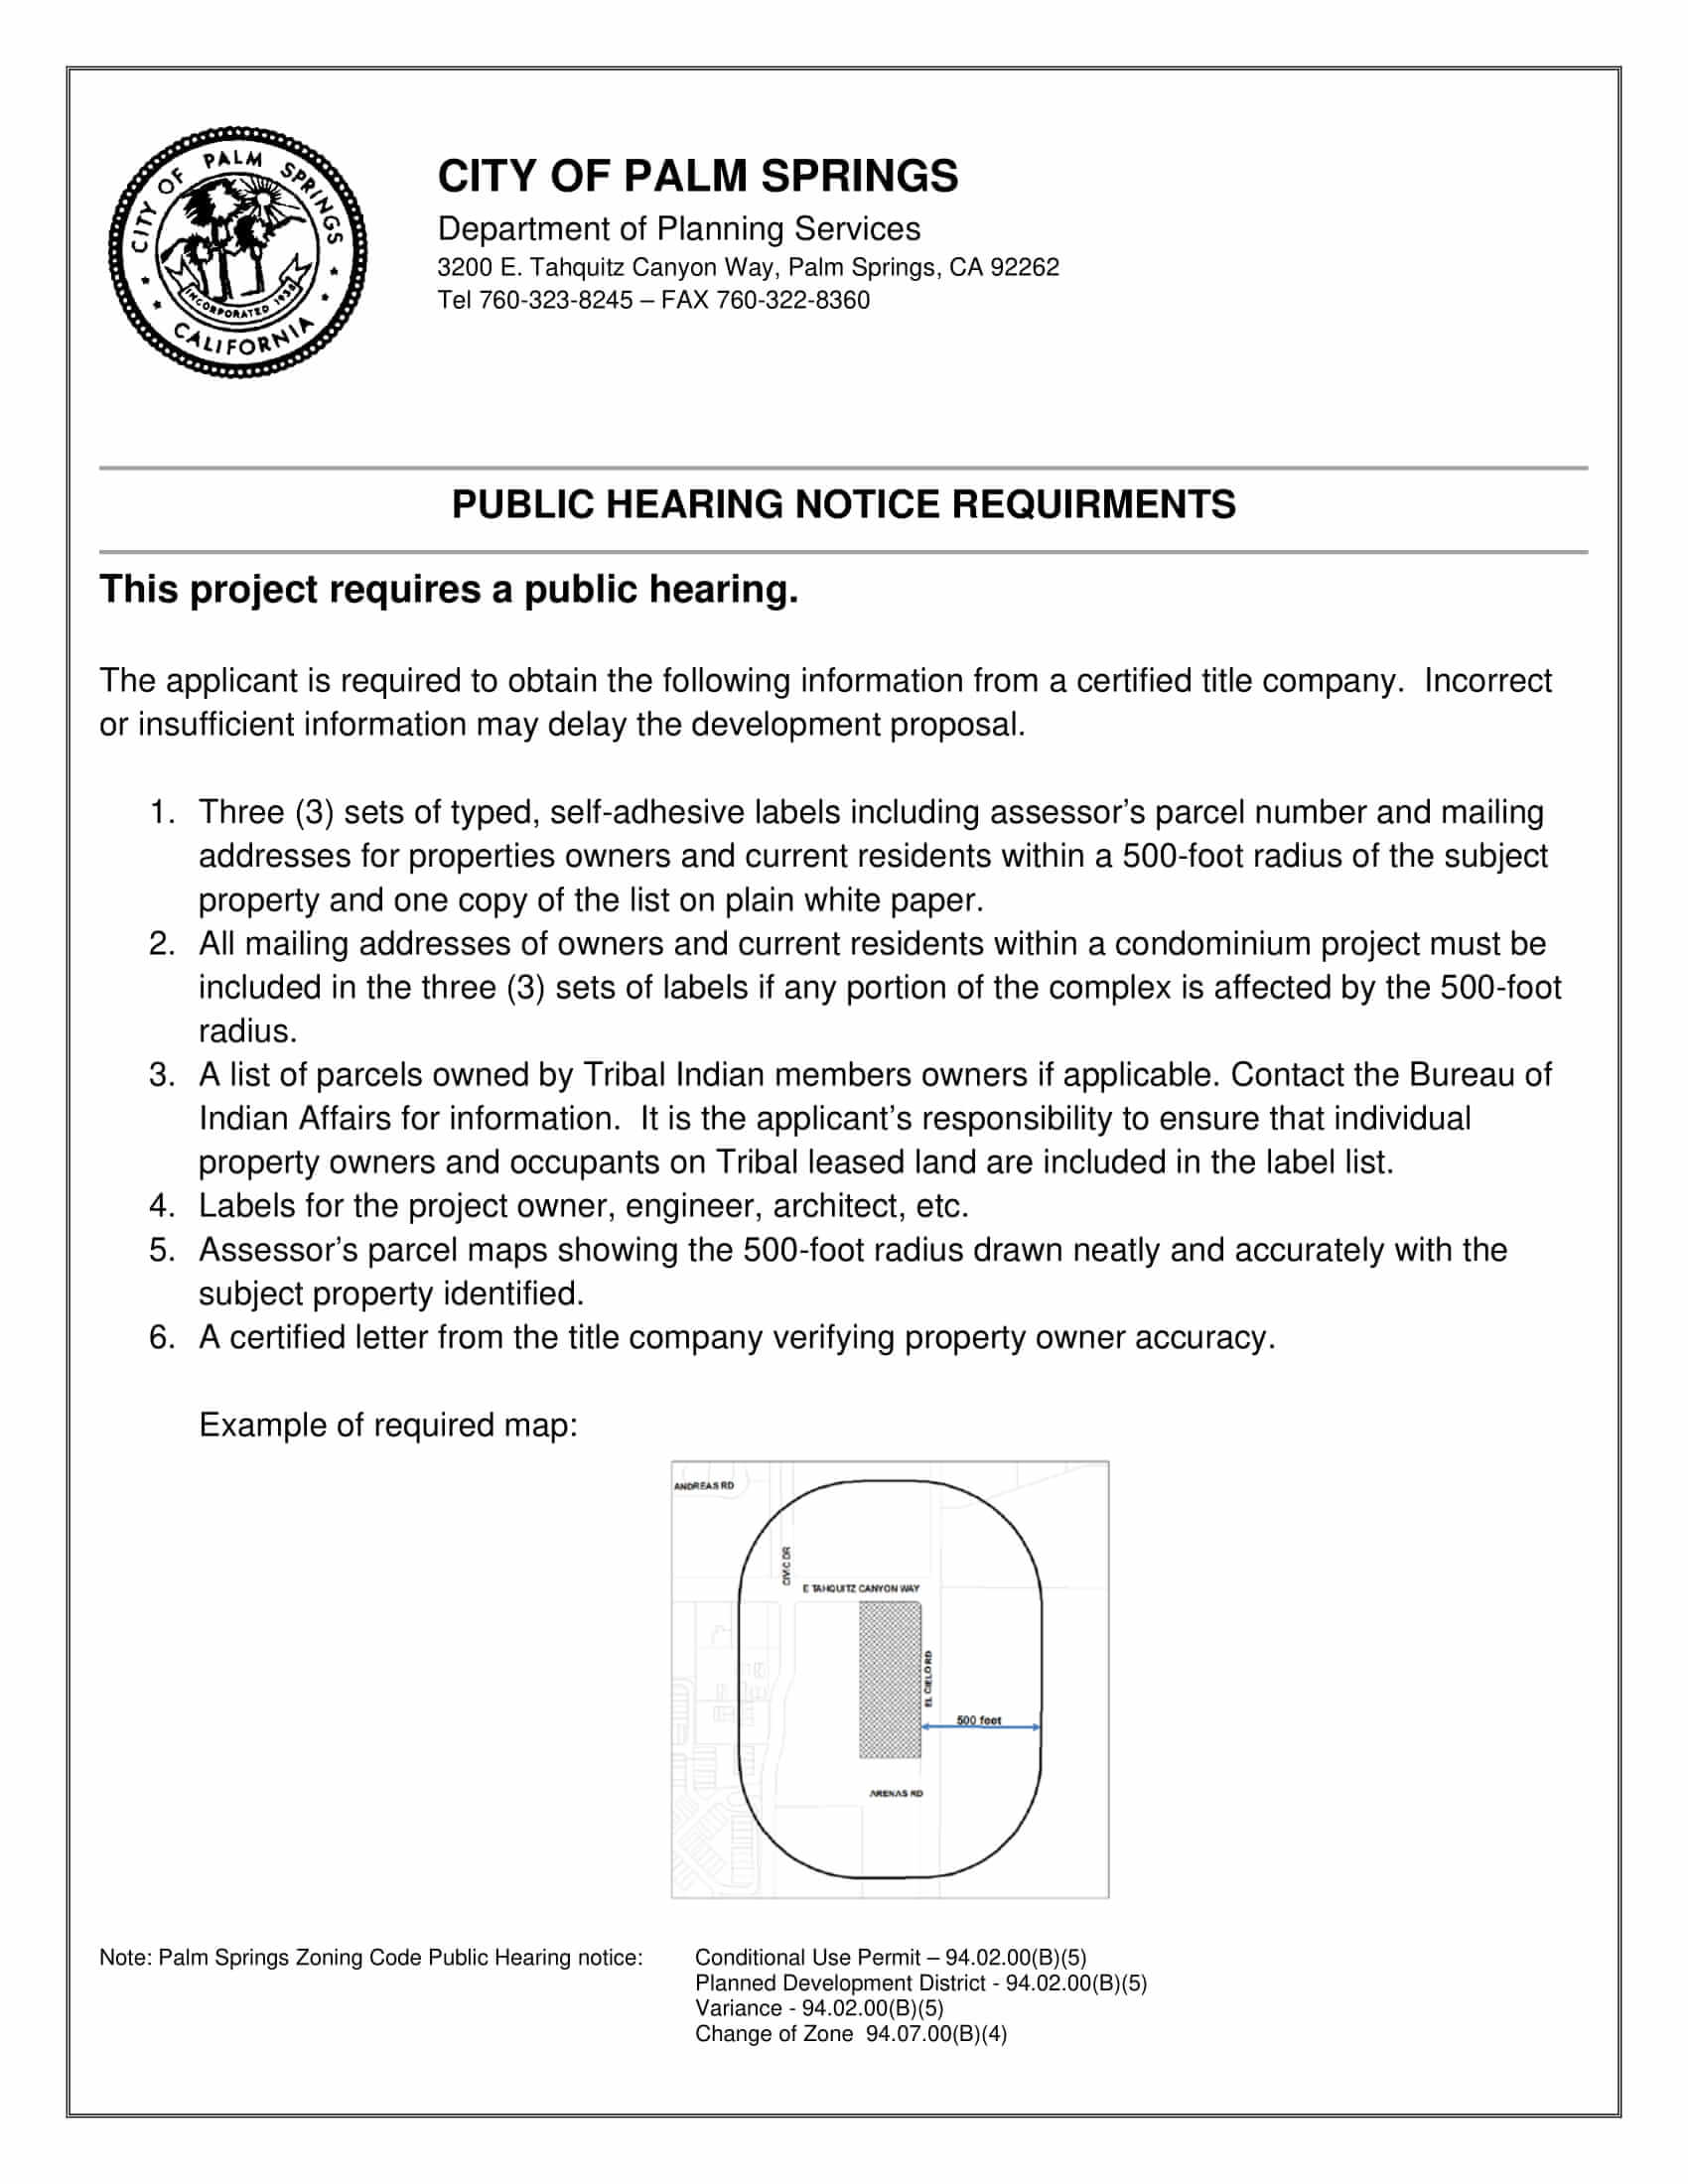 Palm Springs Public Hearing Notice Requirements 500 foot radius mailing labels certified letter